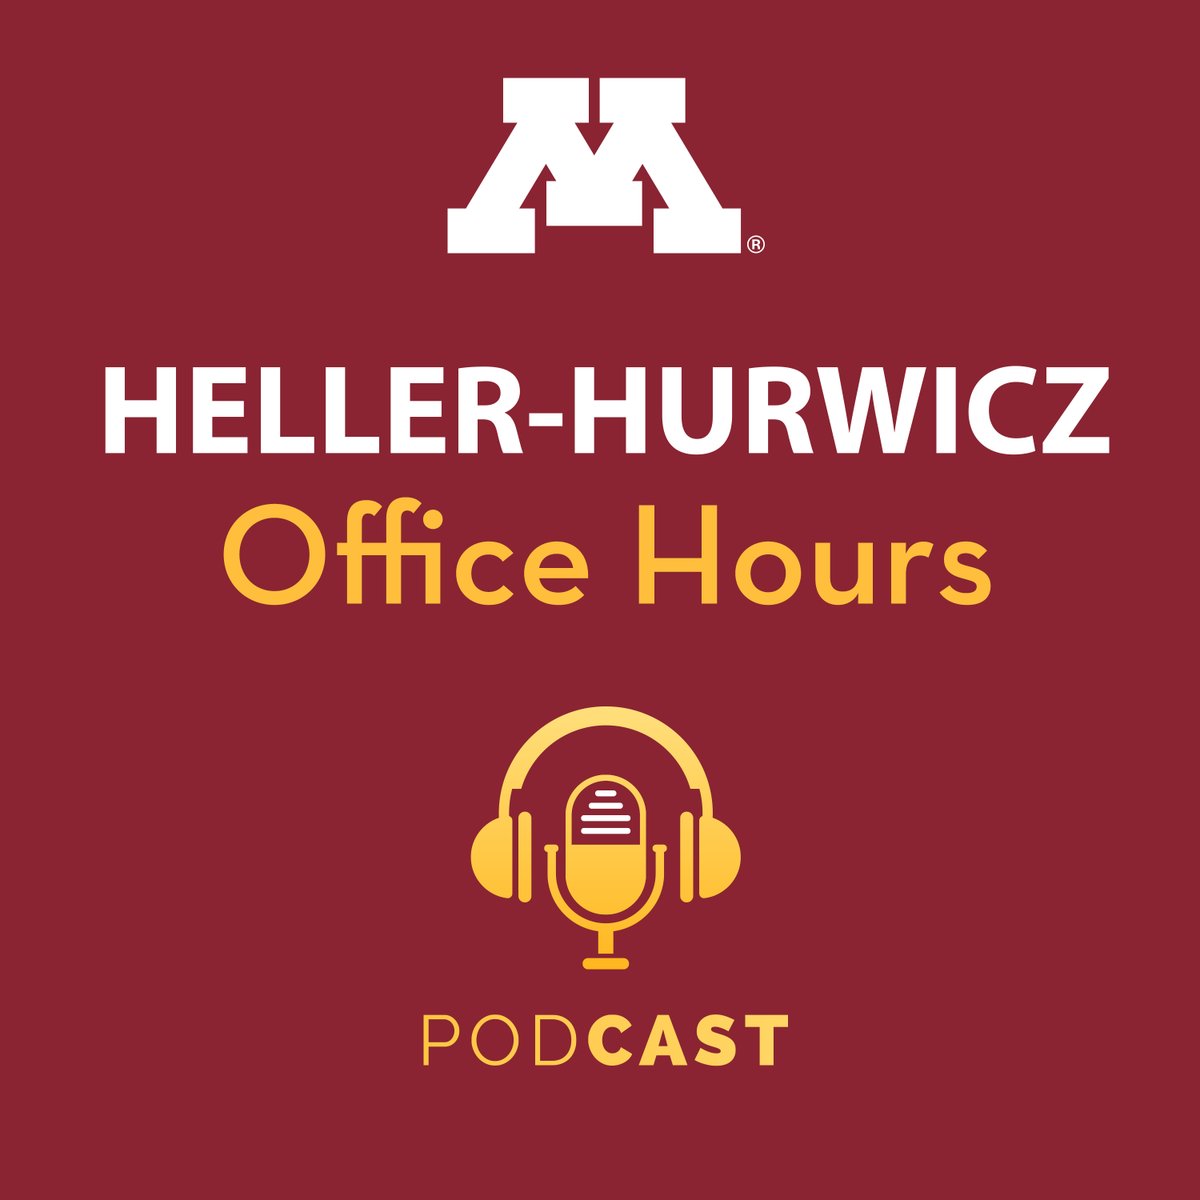 After yesterday's minimum wage conference we're excited to launch episode 5 of the Office Hours pod today, which features @fatihguvenen on income inequality. Listen here: podcasters.spotify.com/pod/show/helle…